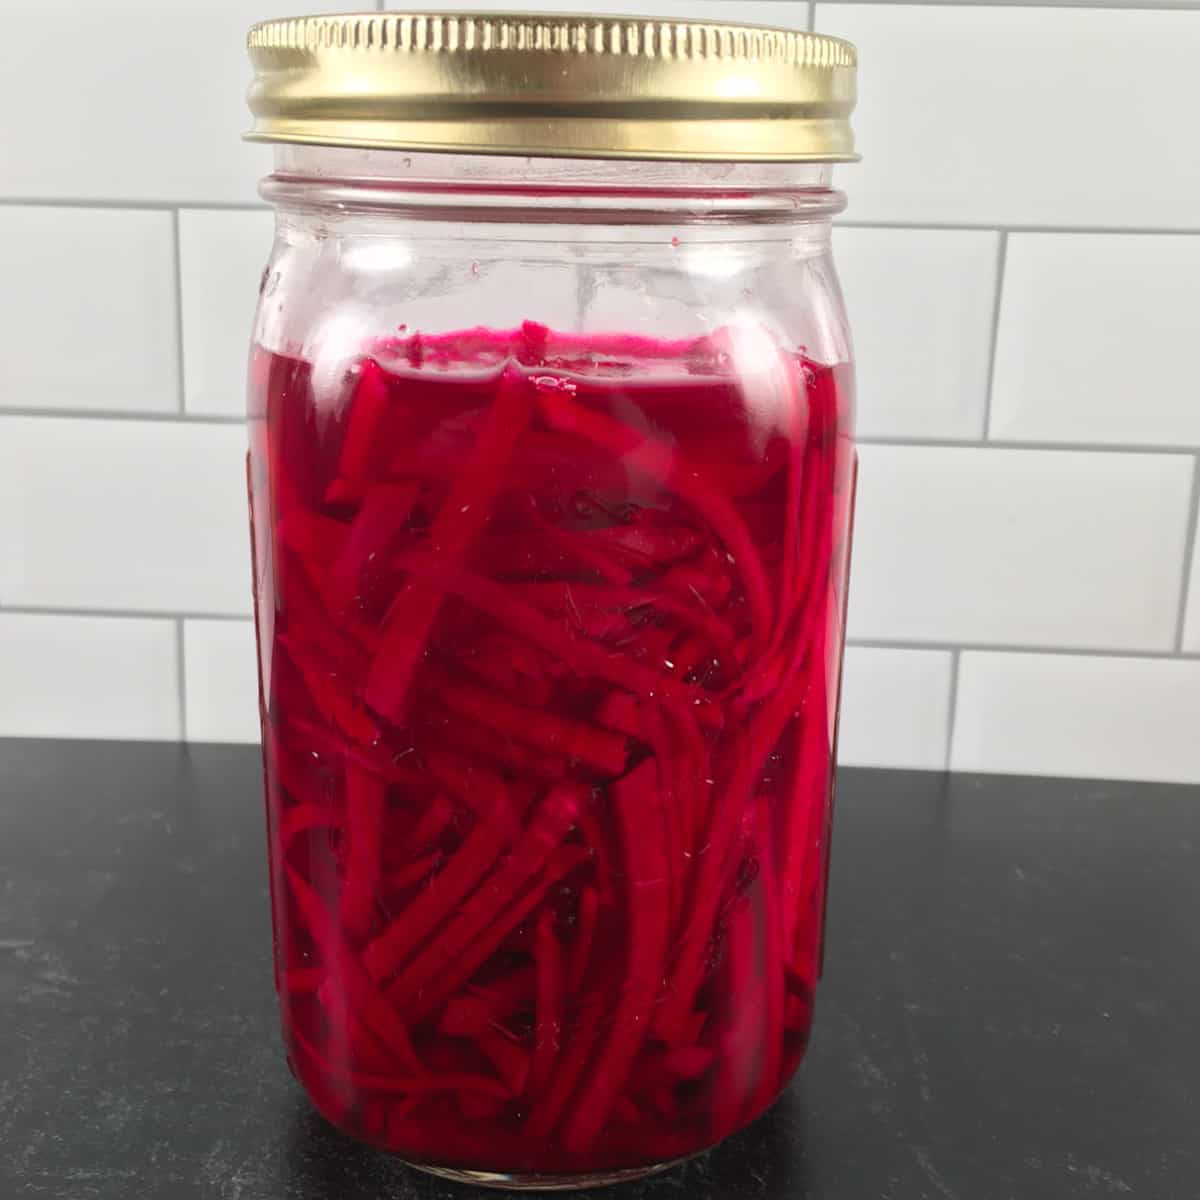 pickled turnips and beets